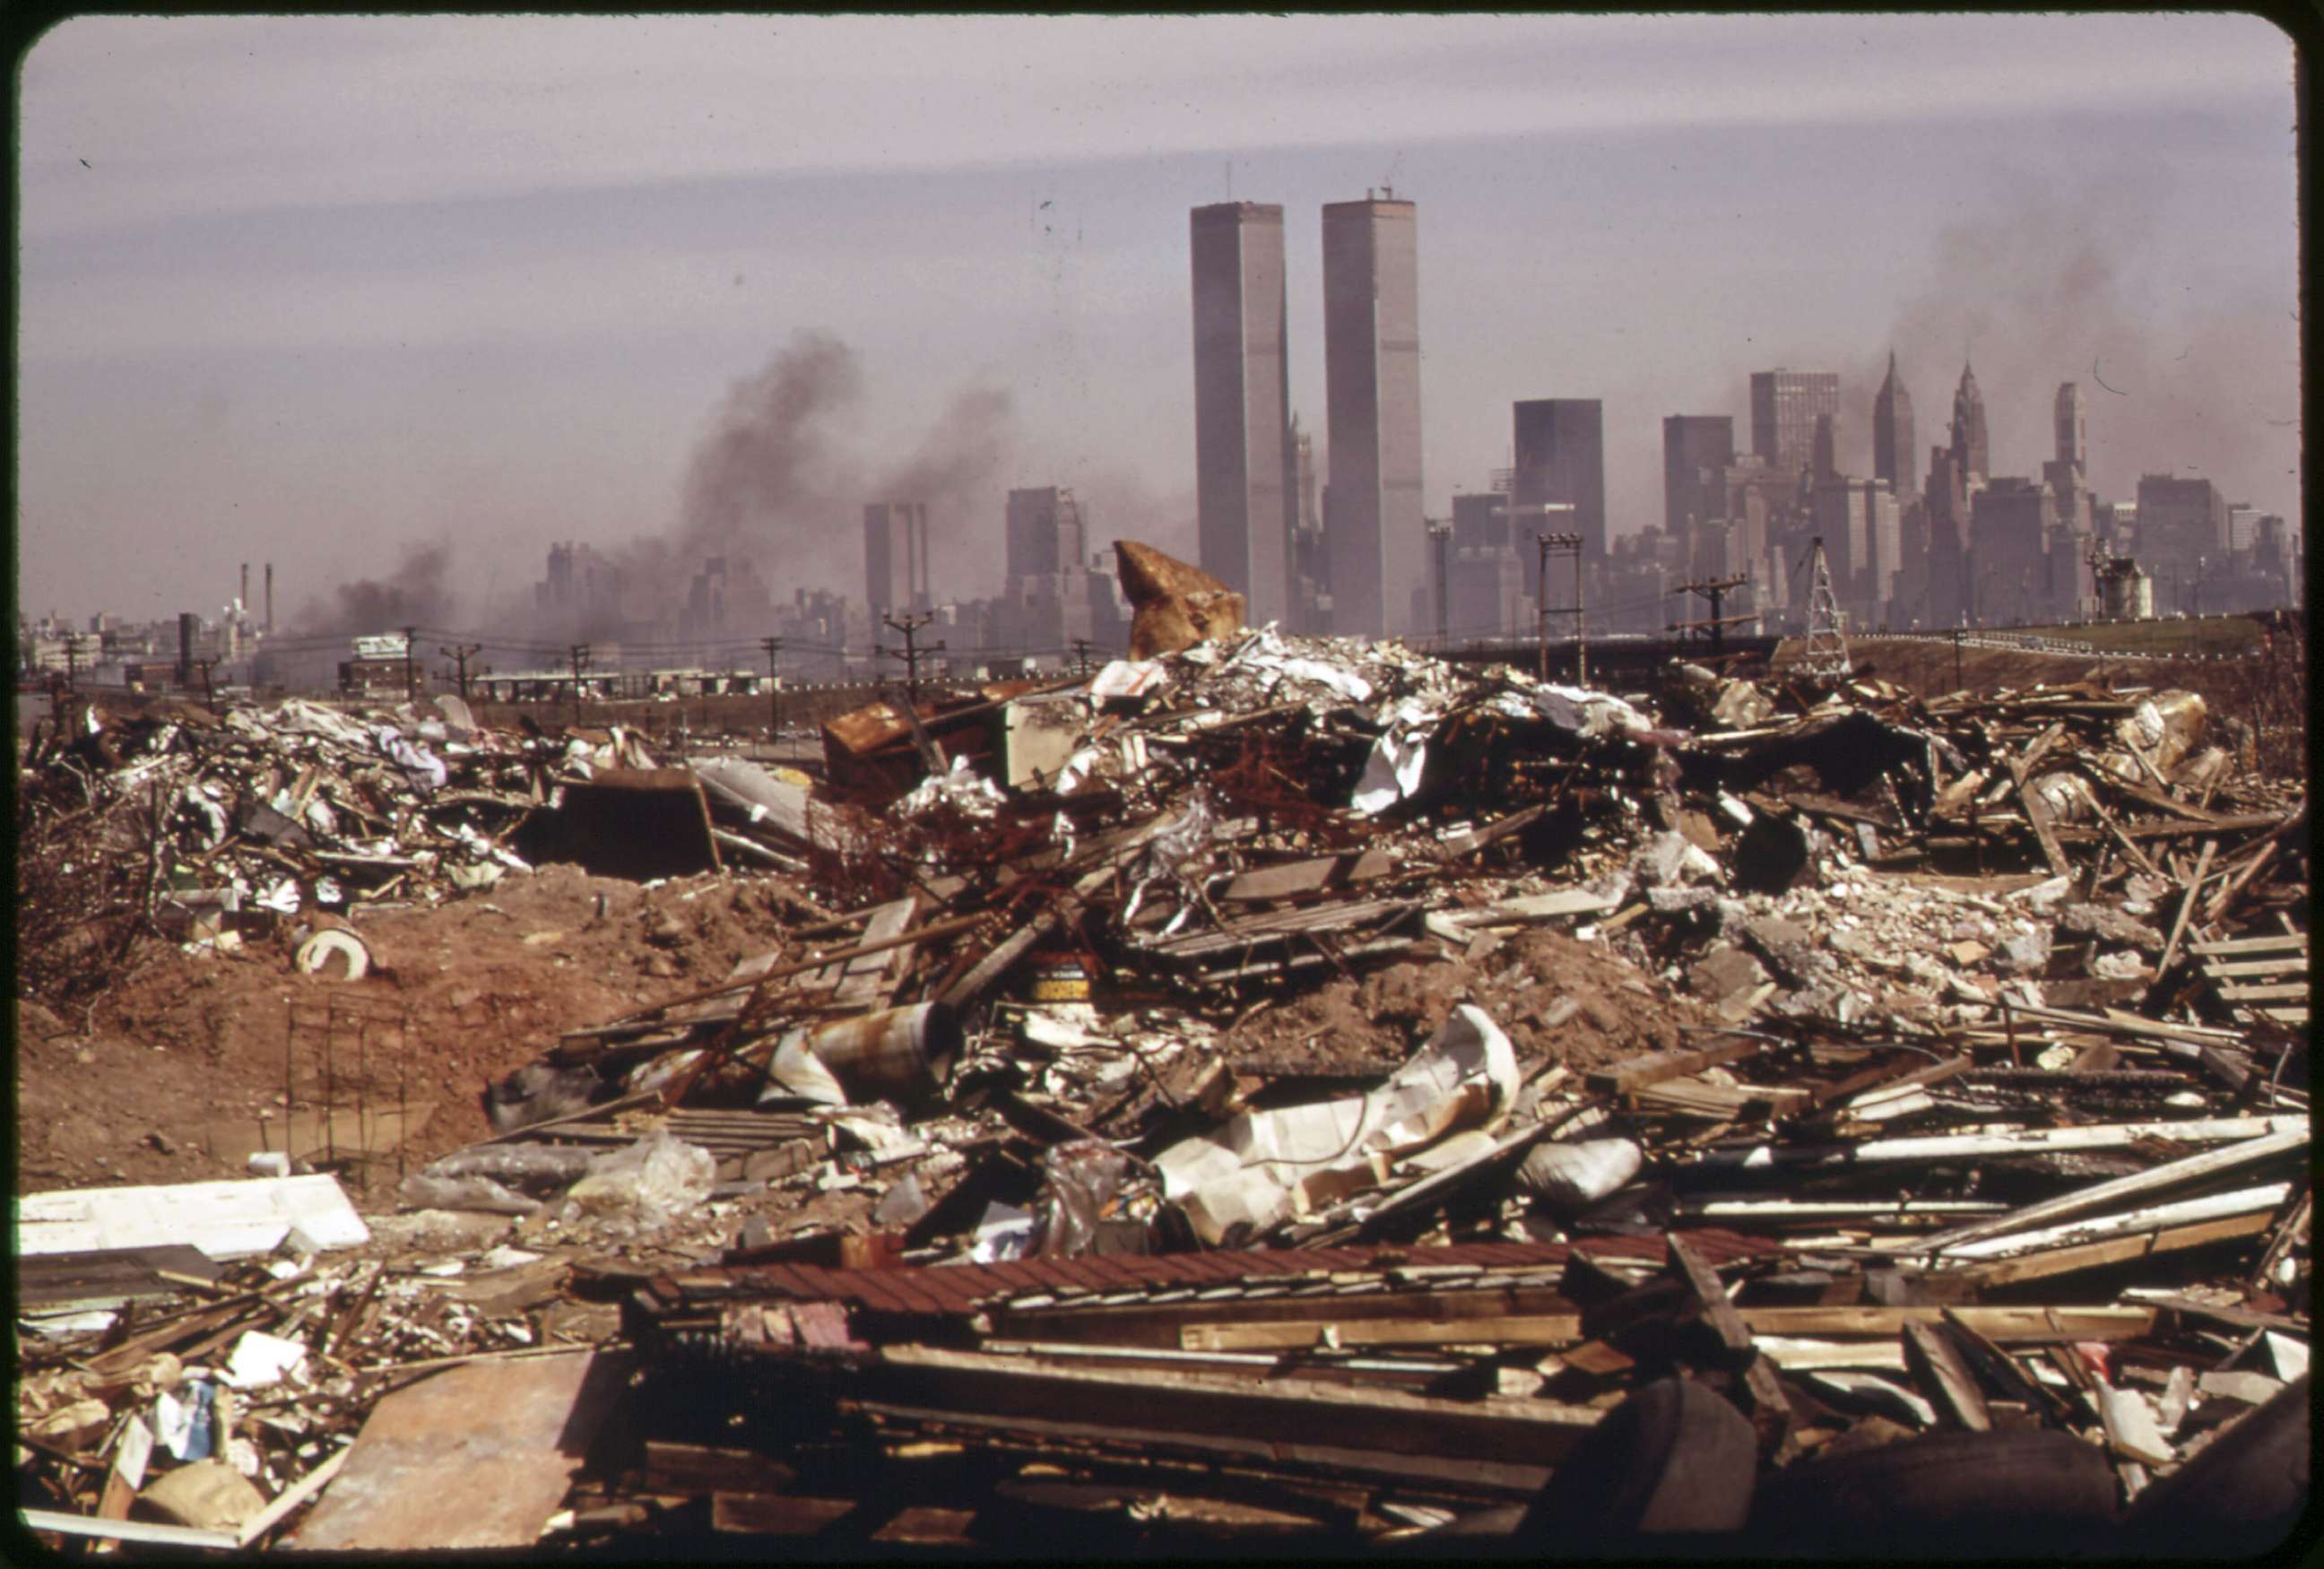 PHOTO: Debris sits in an illegal dumping area off of the New Jersey Turnpike with Manhattan visible in the distance, March 1973.